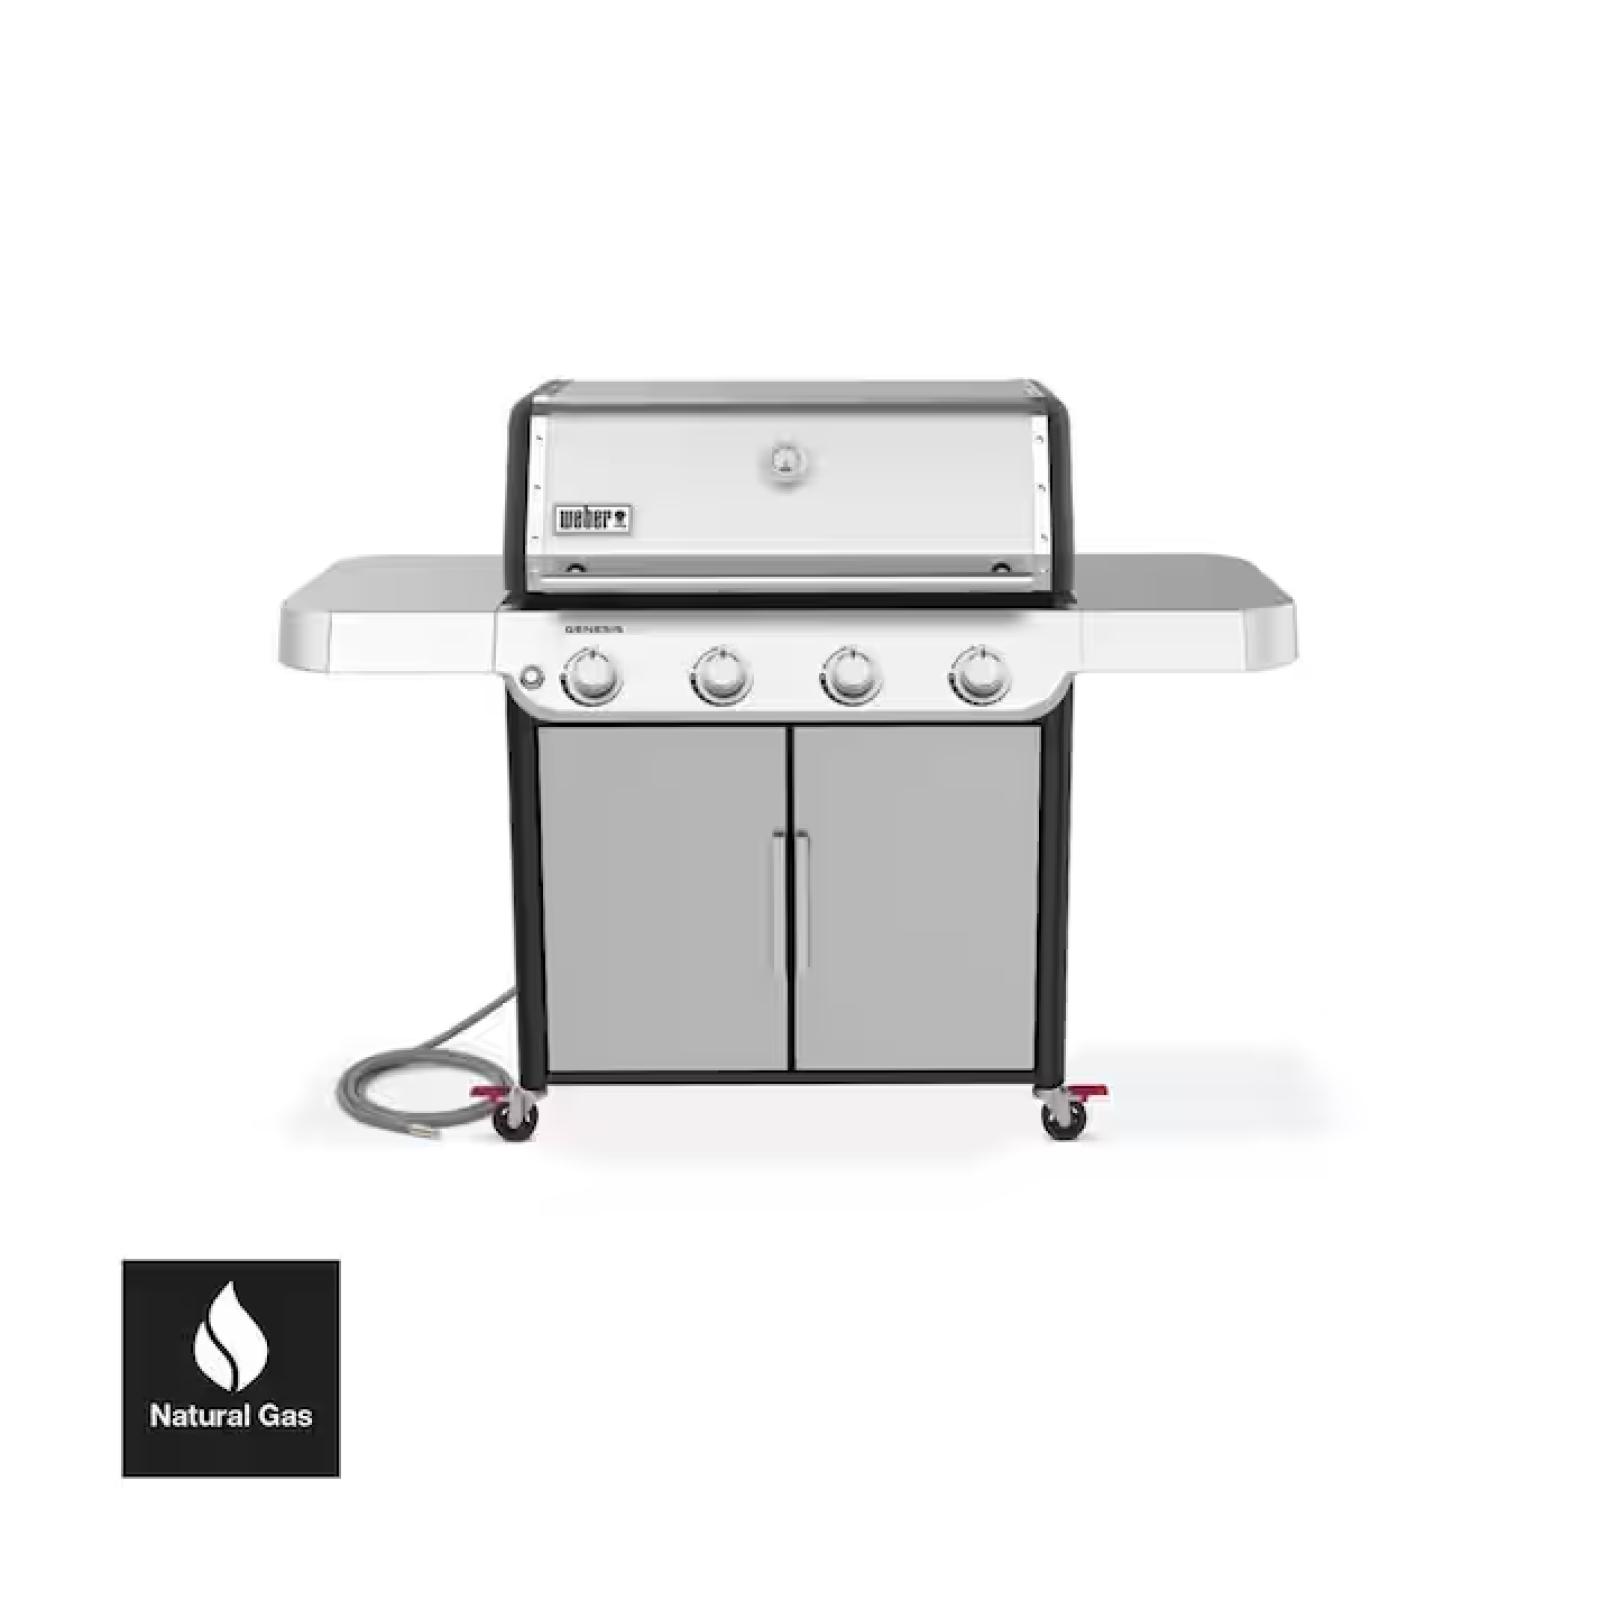 DALLAS LOCATION - Weber Genesis S-415 4-Burner Natural Gas Grill in Stainless Steel